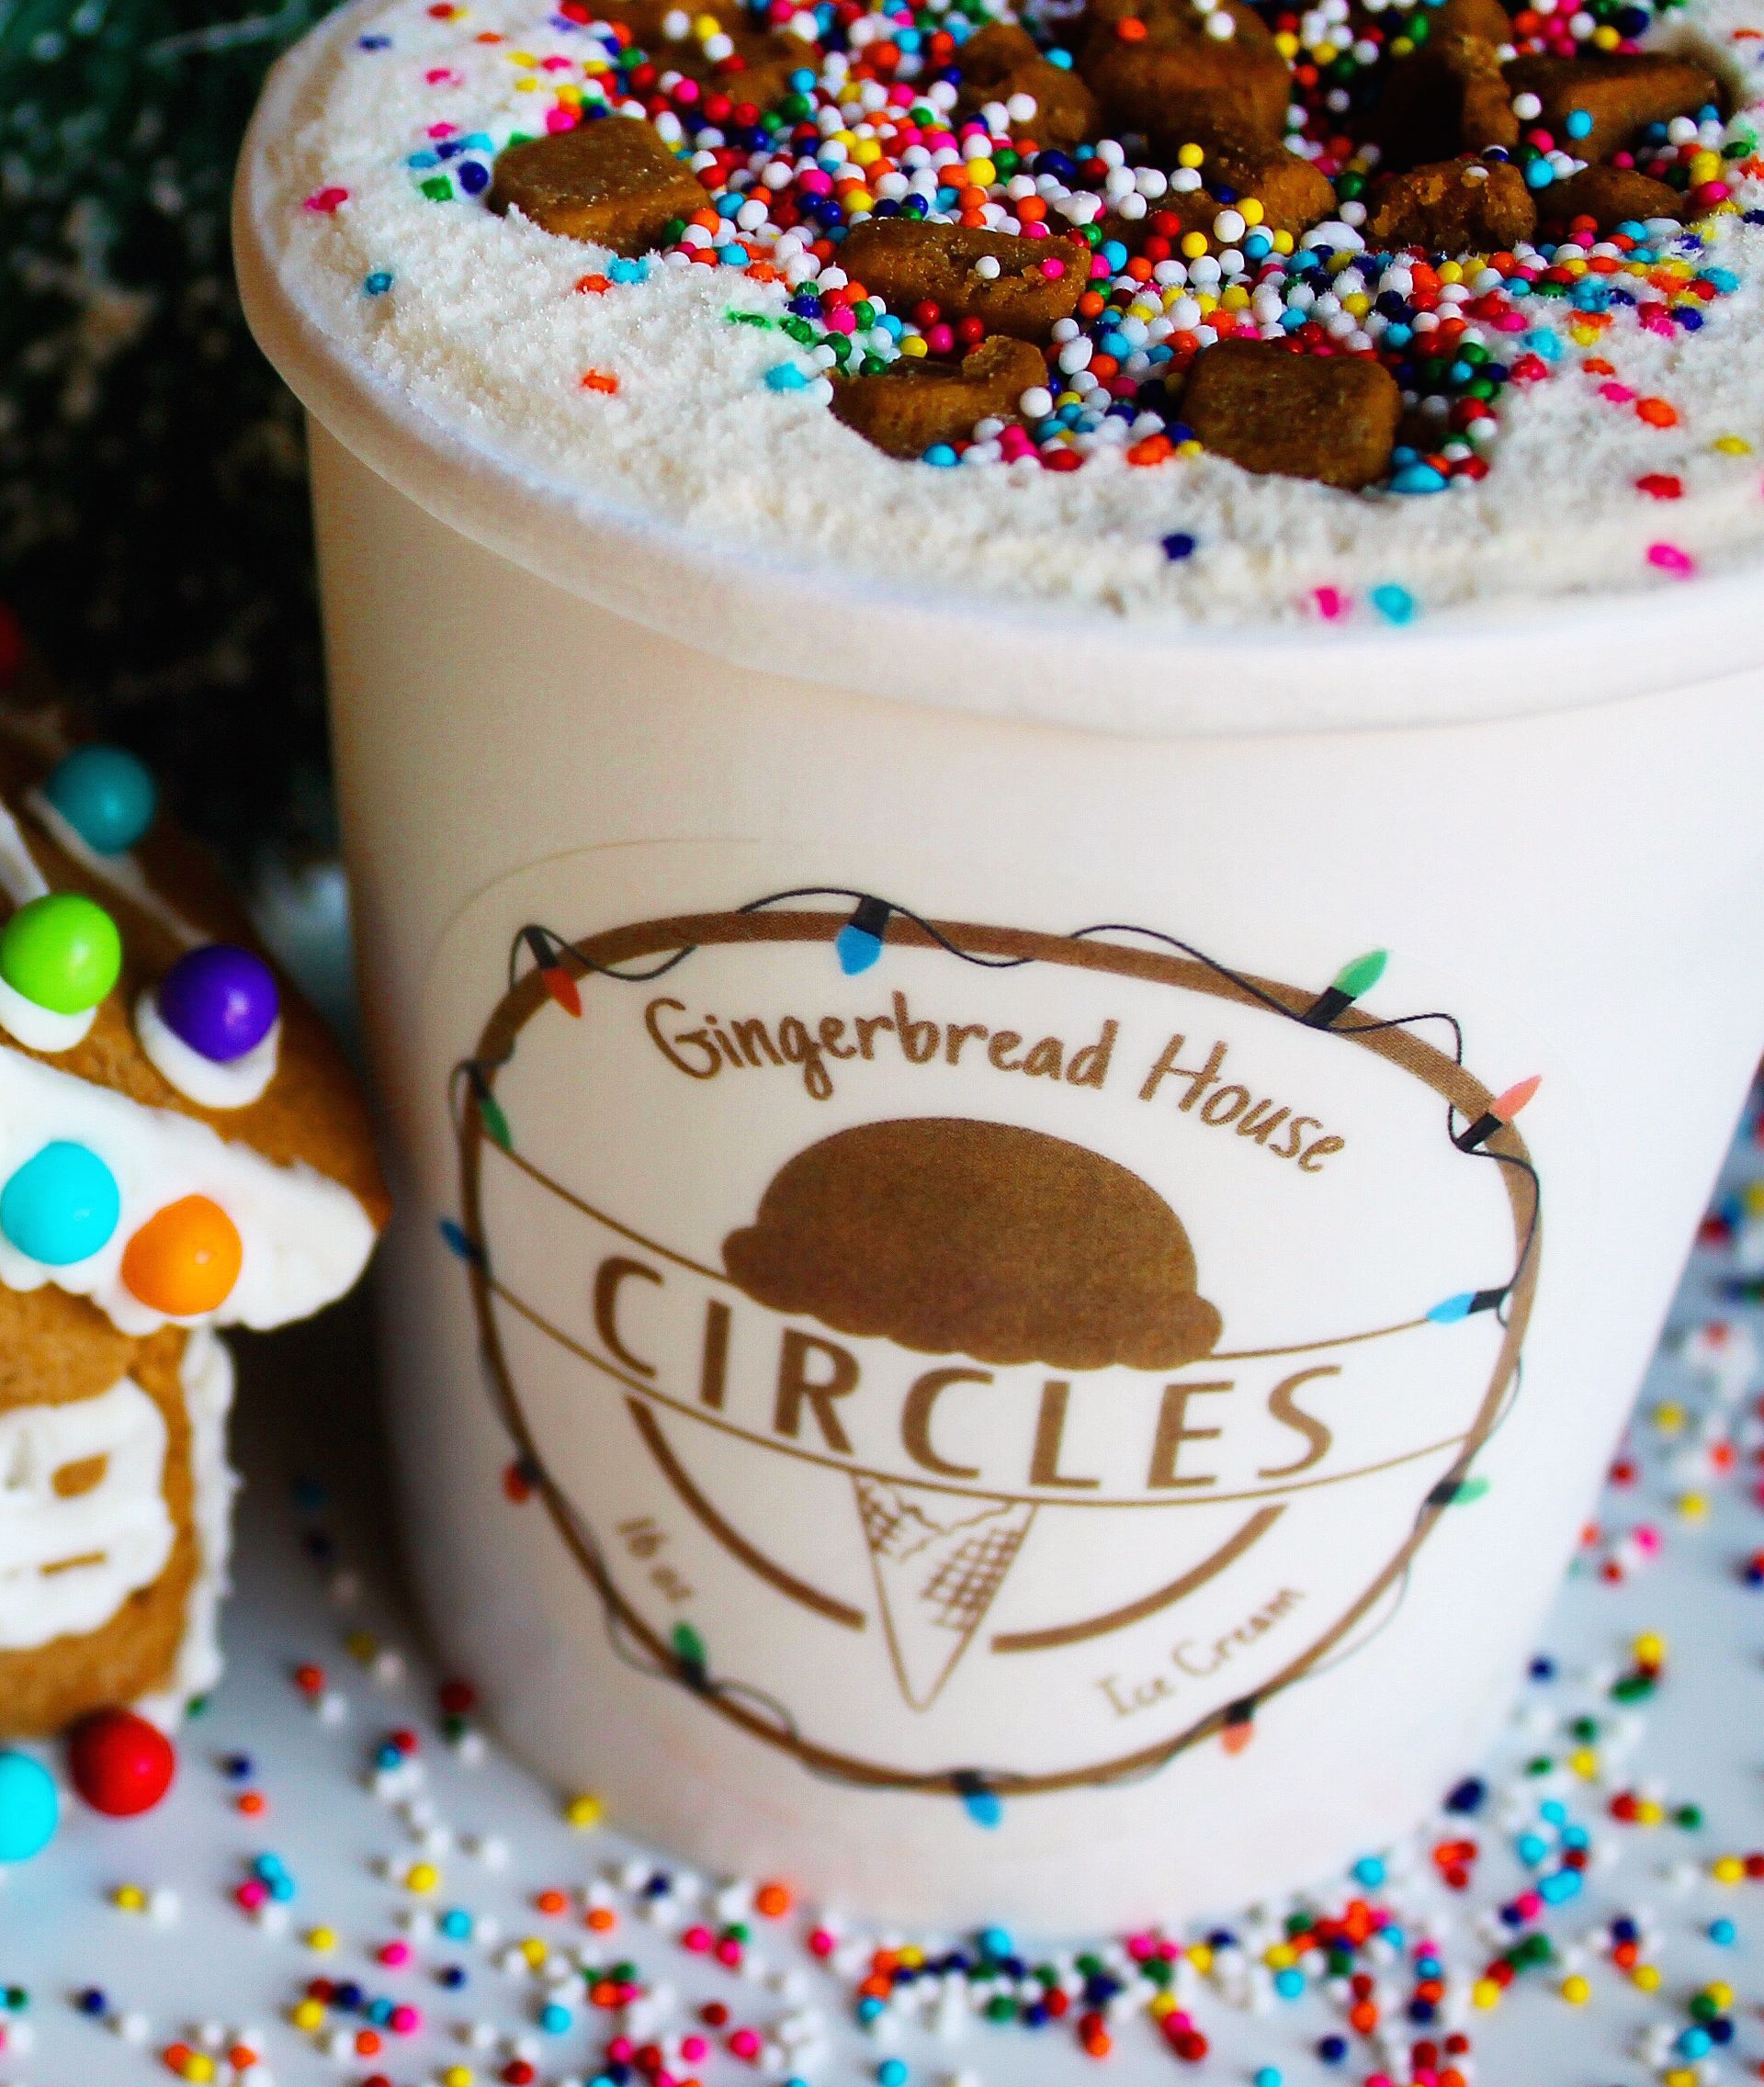 gingerbread house ice cream by circles ice cream